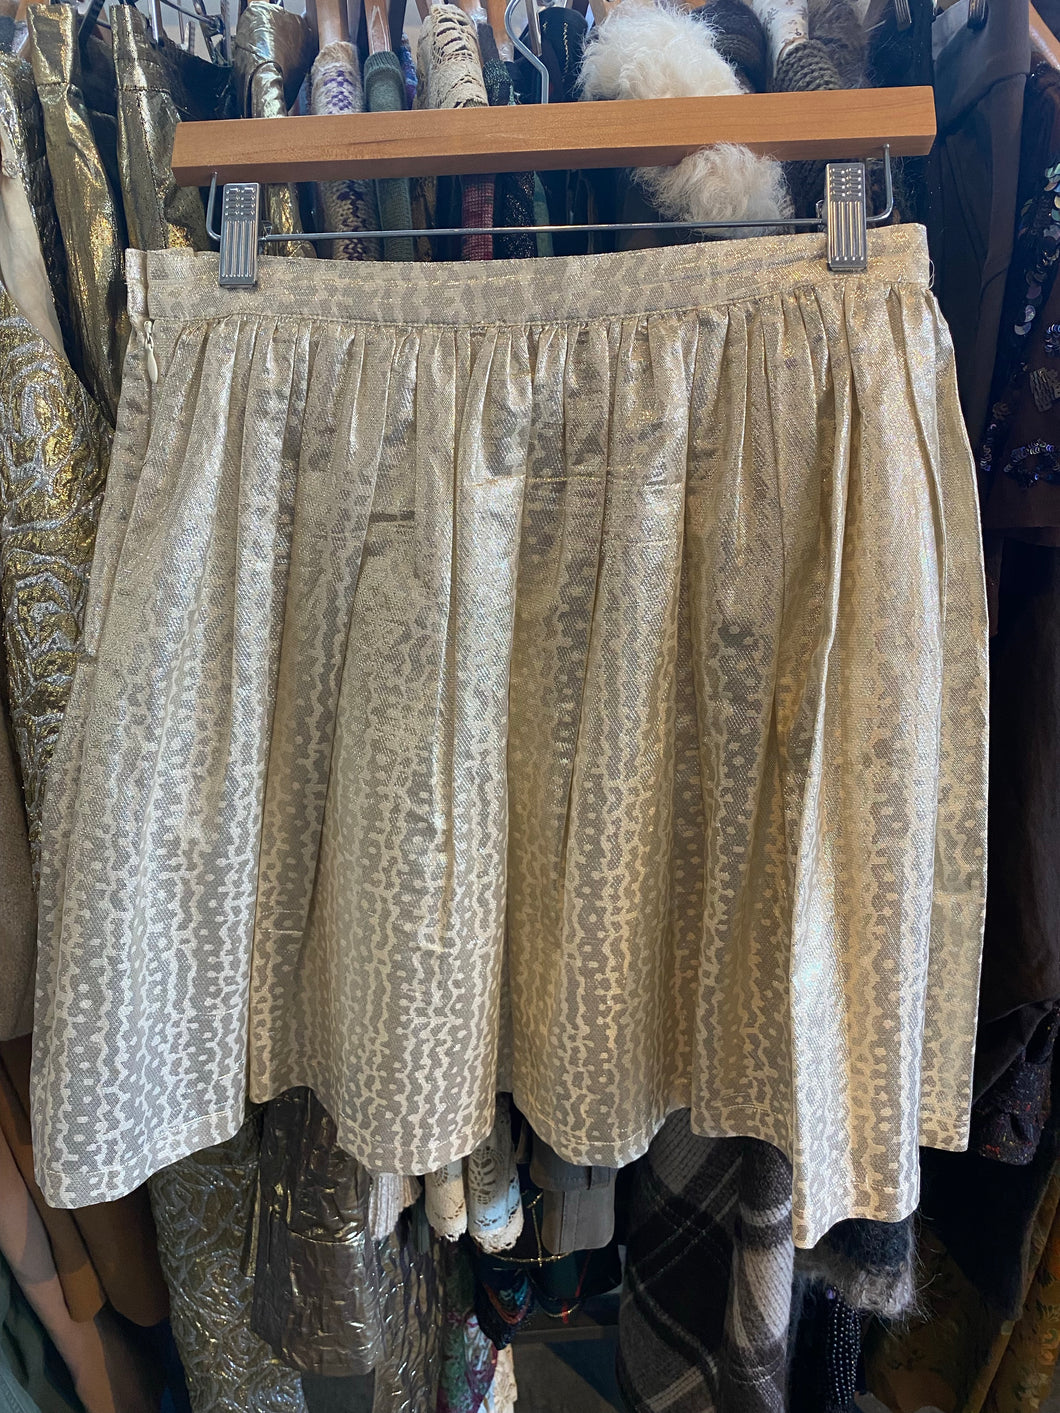 Band of Outsiders Gold Lamé Mini Skirt - The Curatorial Dept.